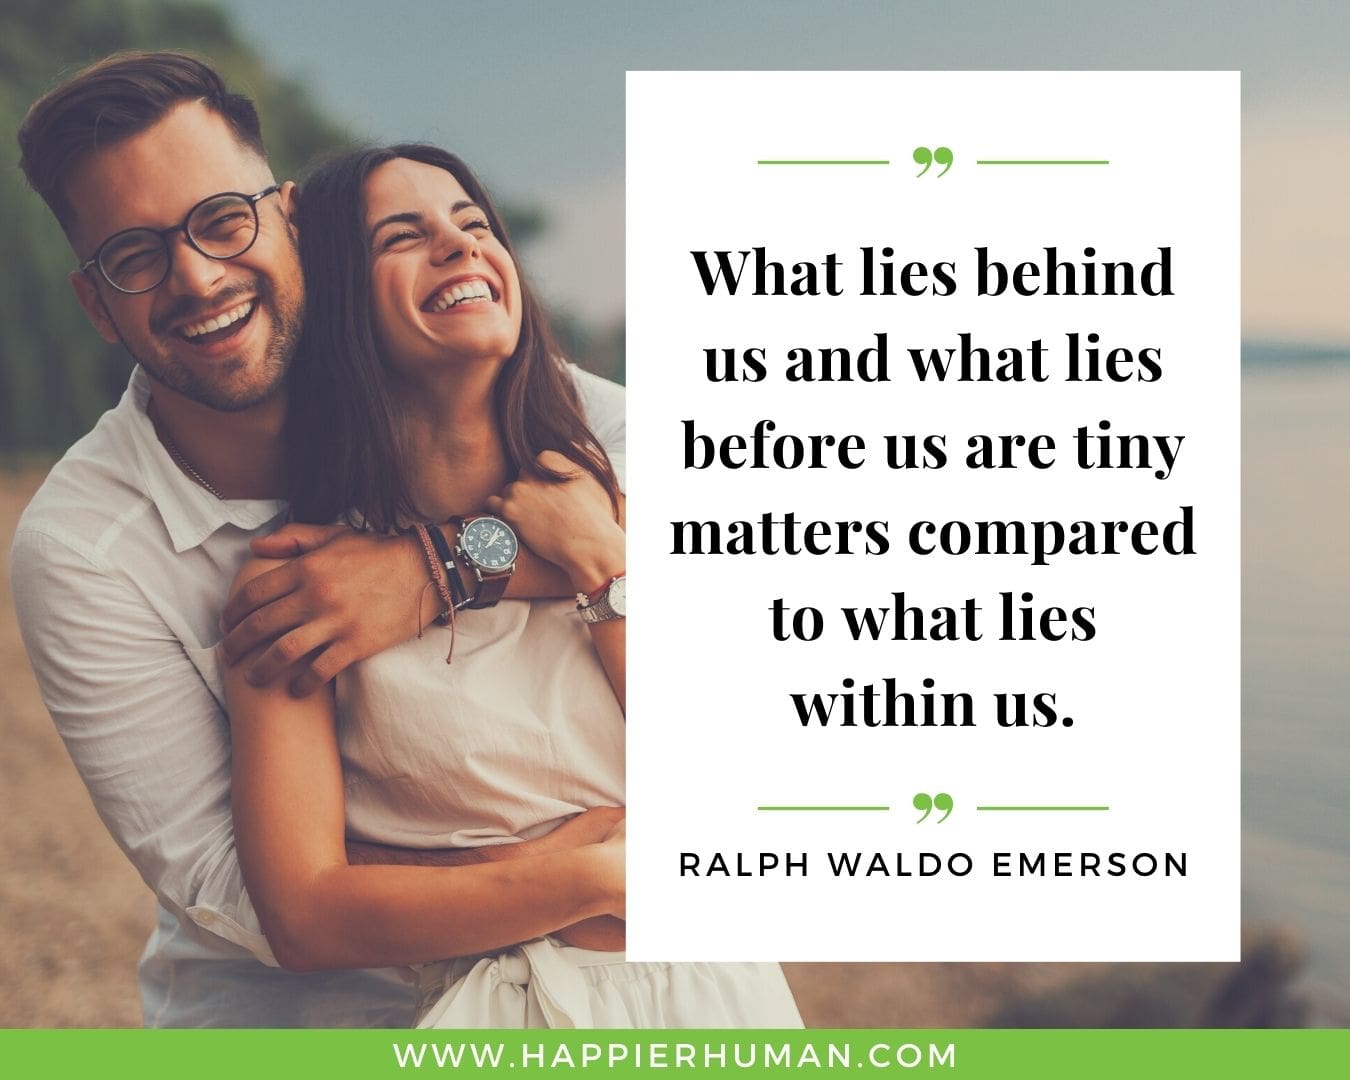 Positive Energy Quotes - “What lies behind us and what lies before us are tiny matters compared to what lies within us.” - Ralph Waldo Emerson